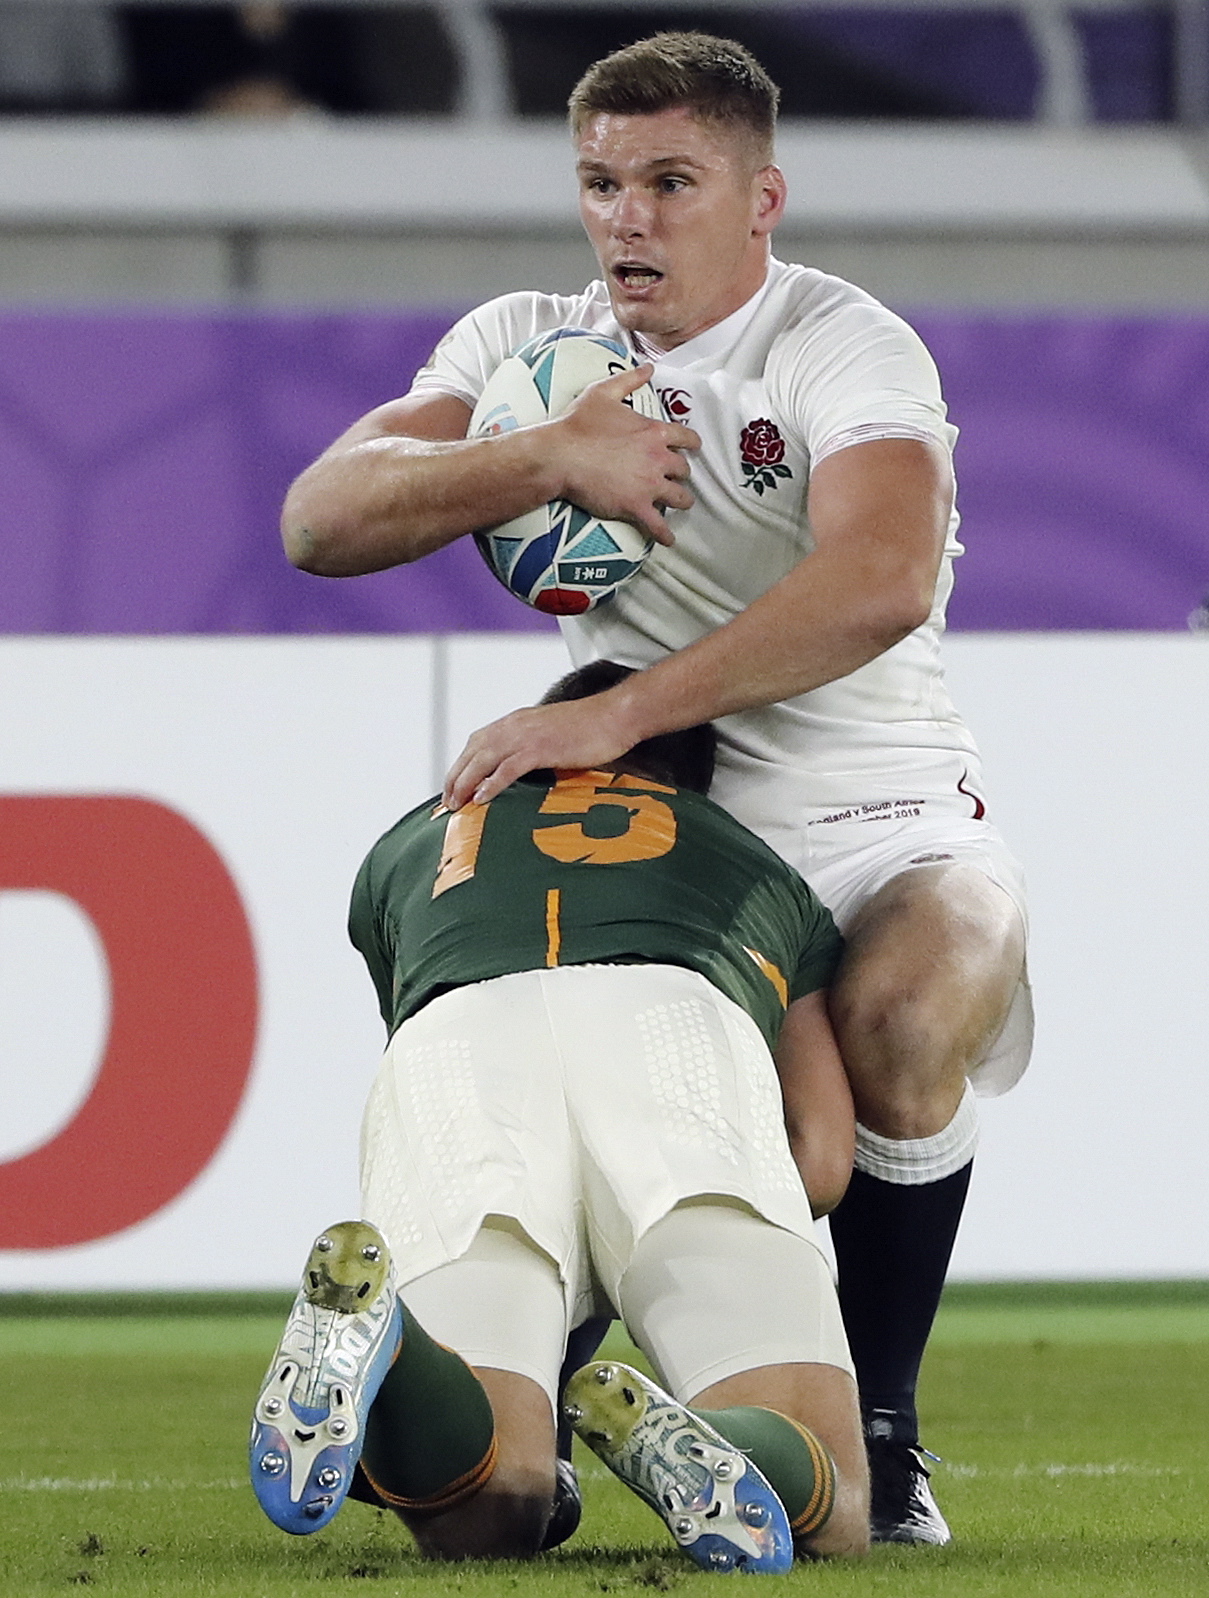 epa07966234 Willie Le Roux of South Africa (L) tackles Owen Farrell of England (R) during the Rugby World Cup final match between England and South Africa at the International Stadium Yokohama, Kanagawa Prefecture, Yokohama, Japan, 02 November 2019. EPA/MARK R. CRISTINO EDITORIAL USE ONLY/ NO COMMERCIAL SALES / NOT USED IN ASSOCATION WITH ANY COMMERCIAL ENTITY